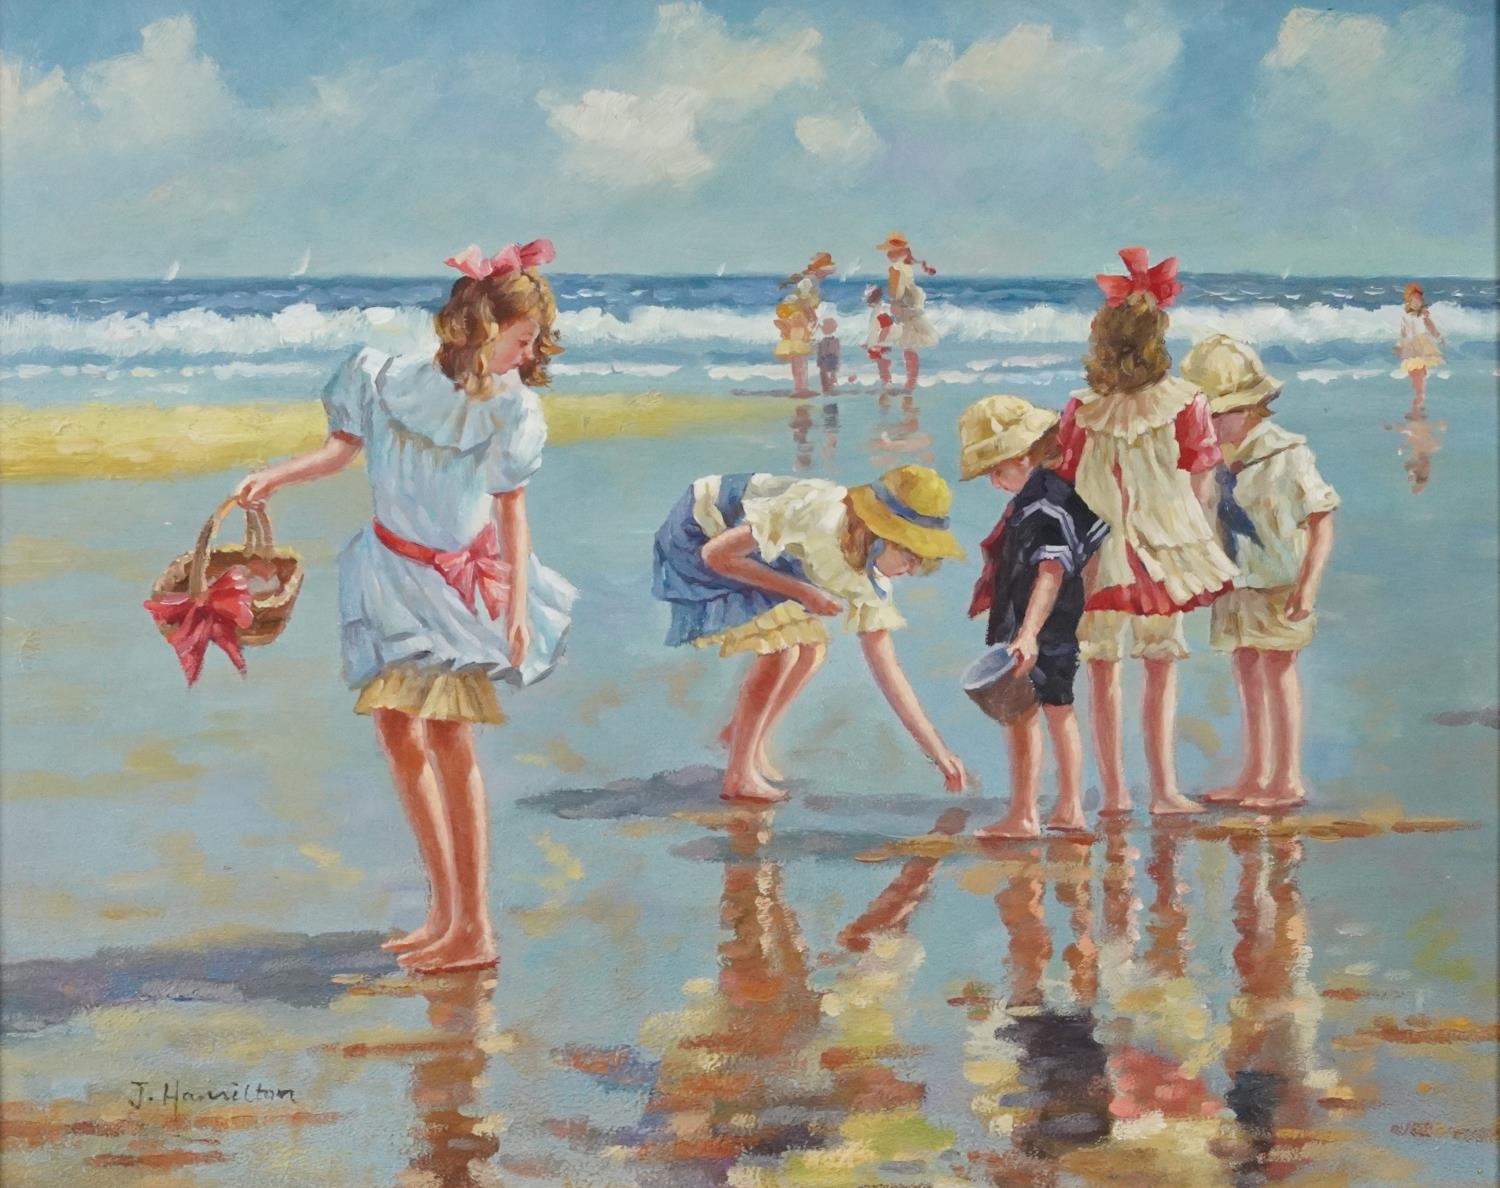 J Hamilton - Beach scene with children playing, contemporary oil on panel, mounted and framed,